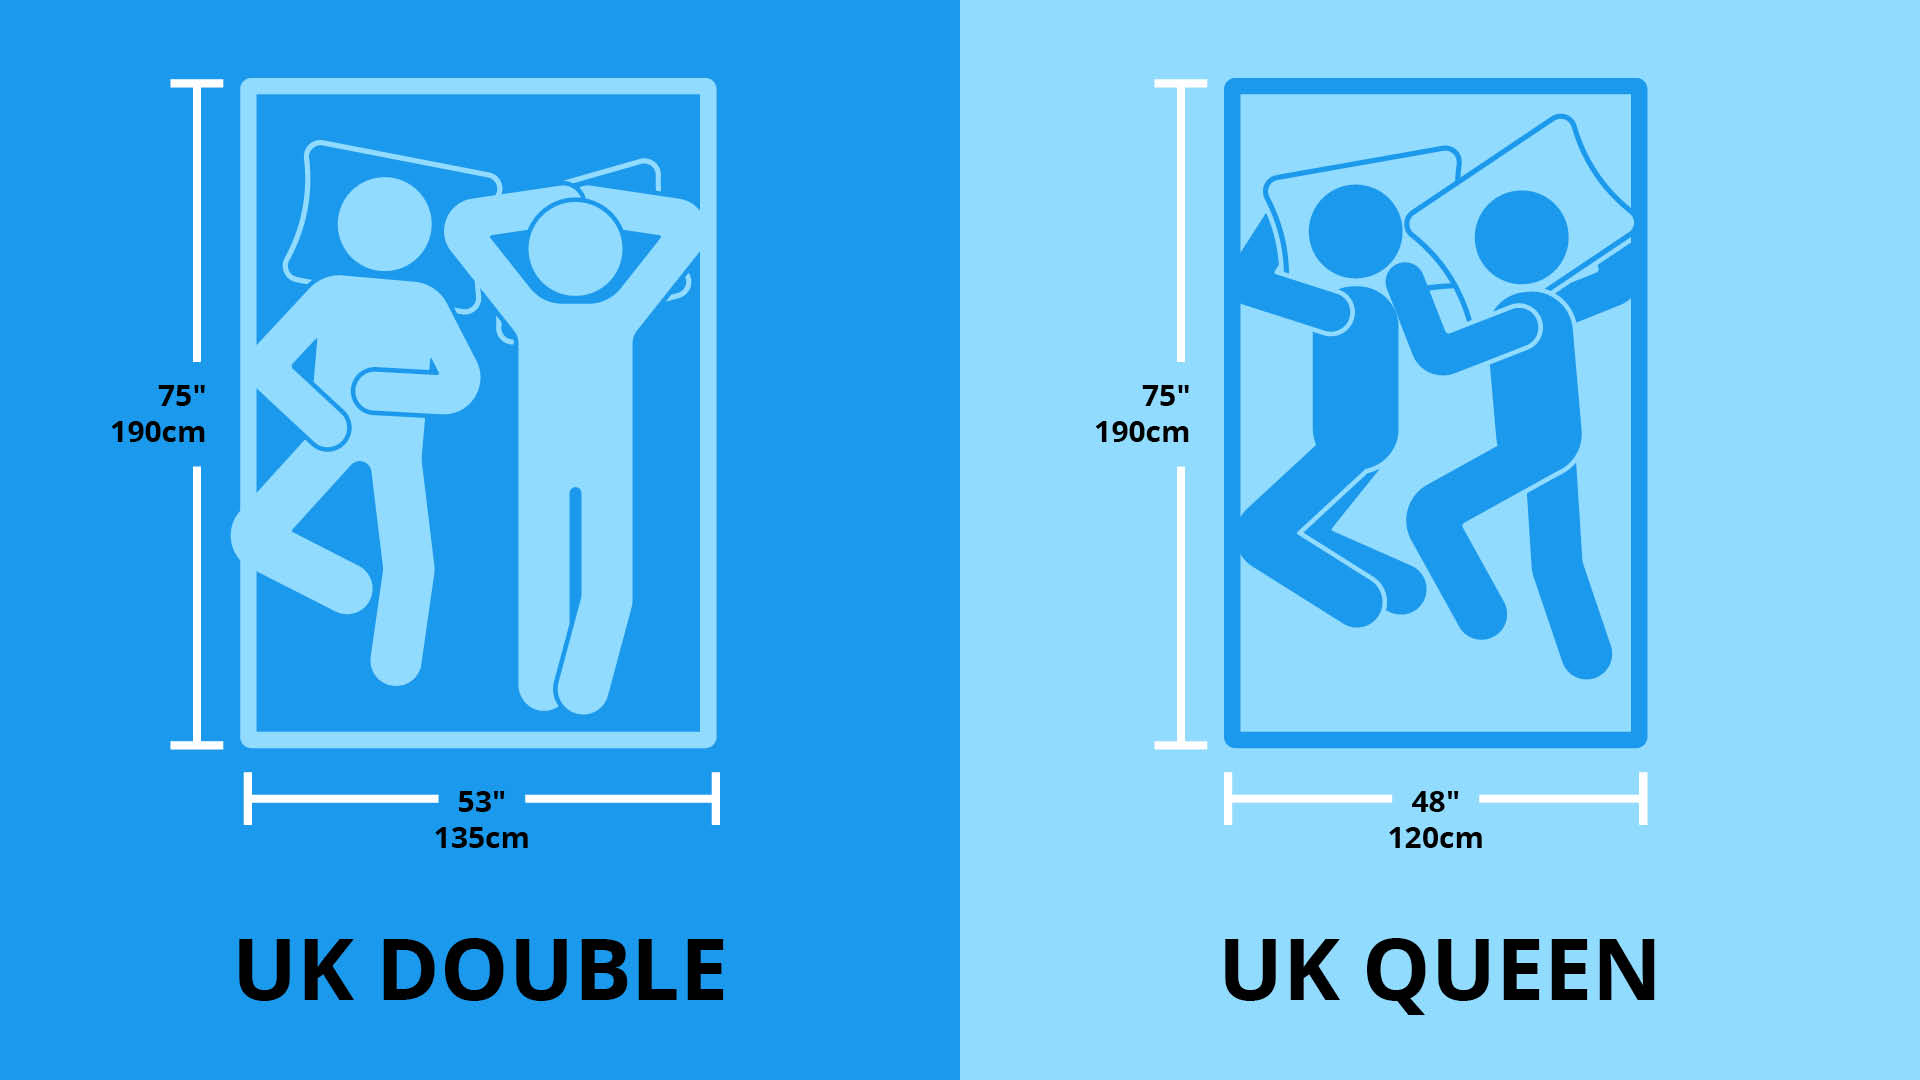 Illustration showing UK double and UK queen mattress sizes